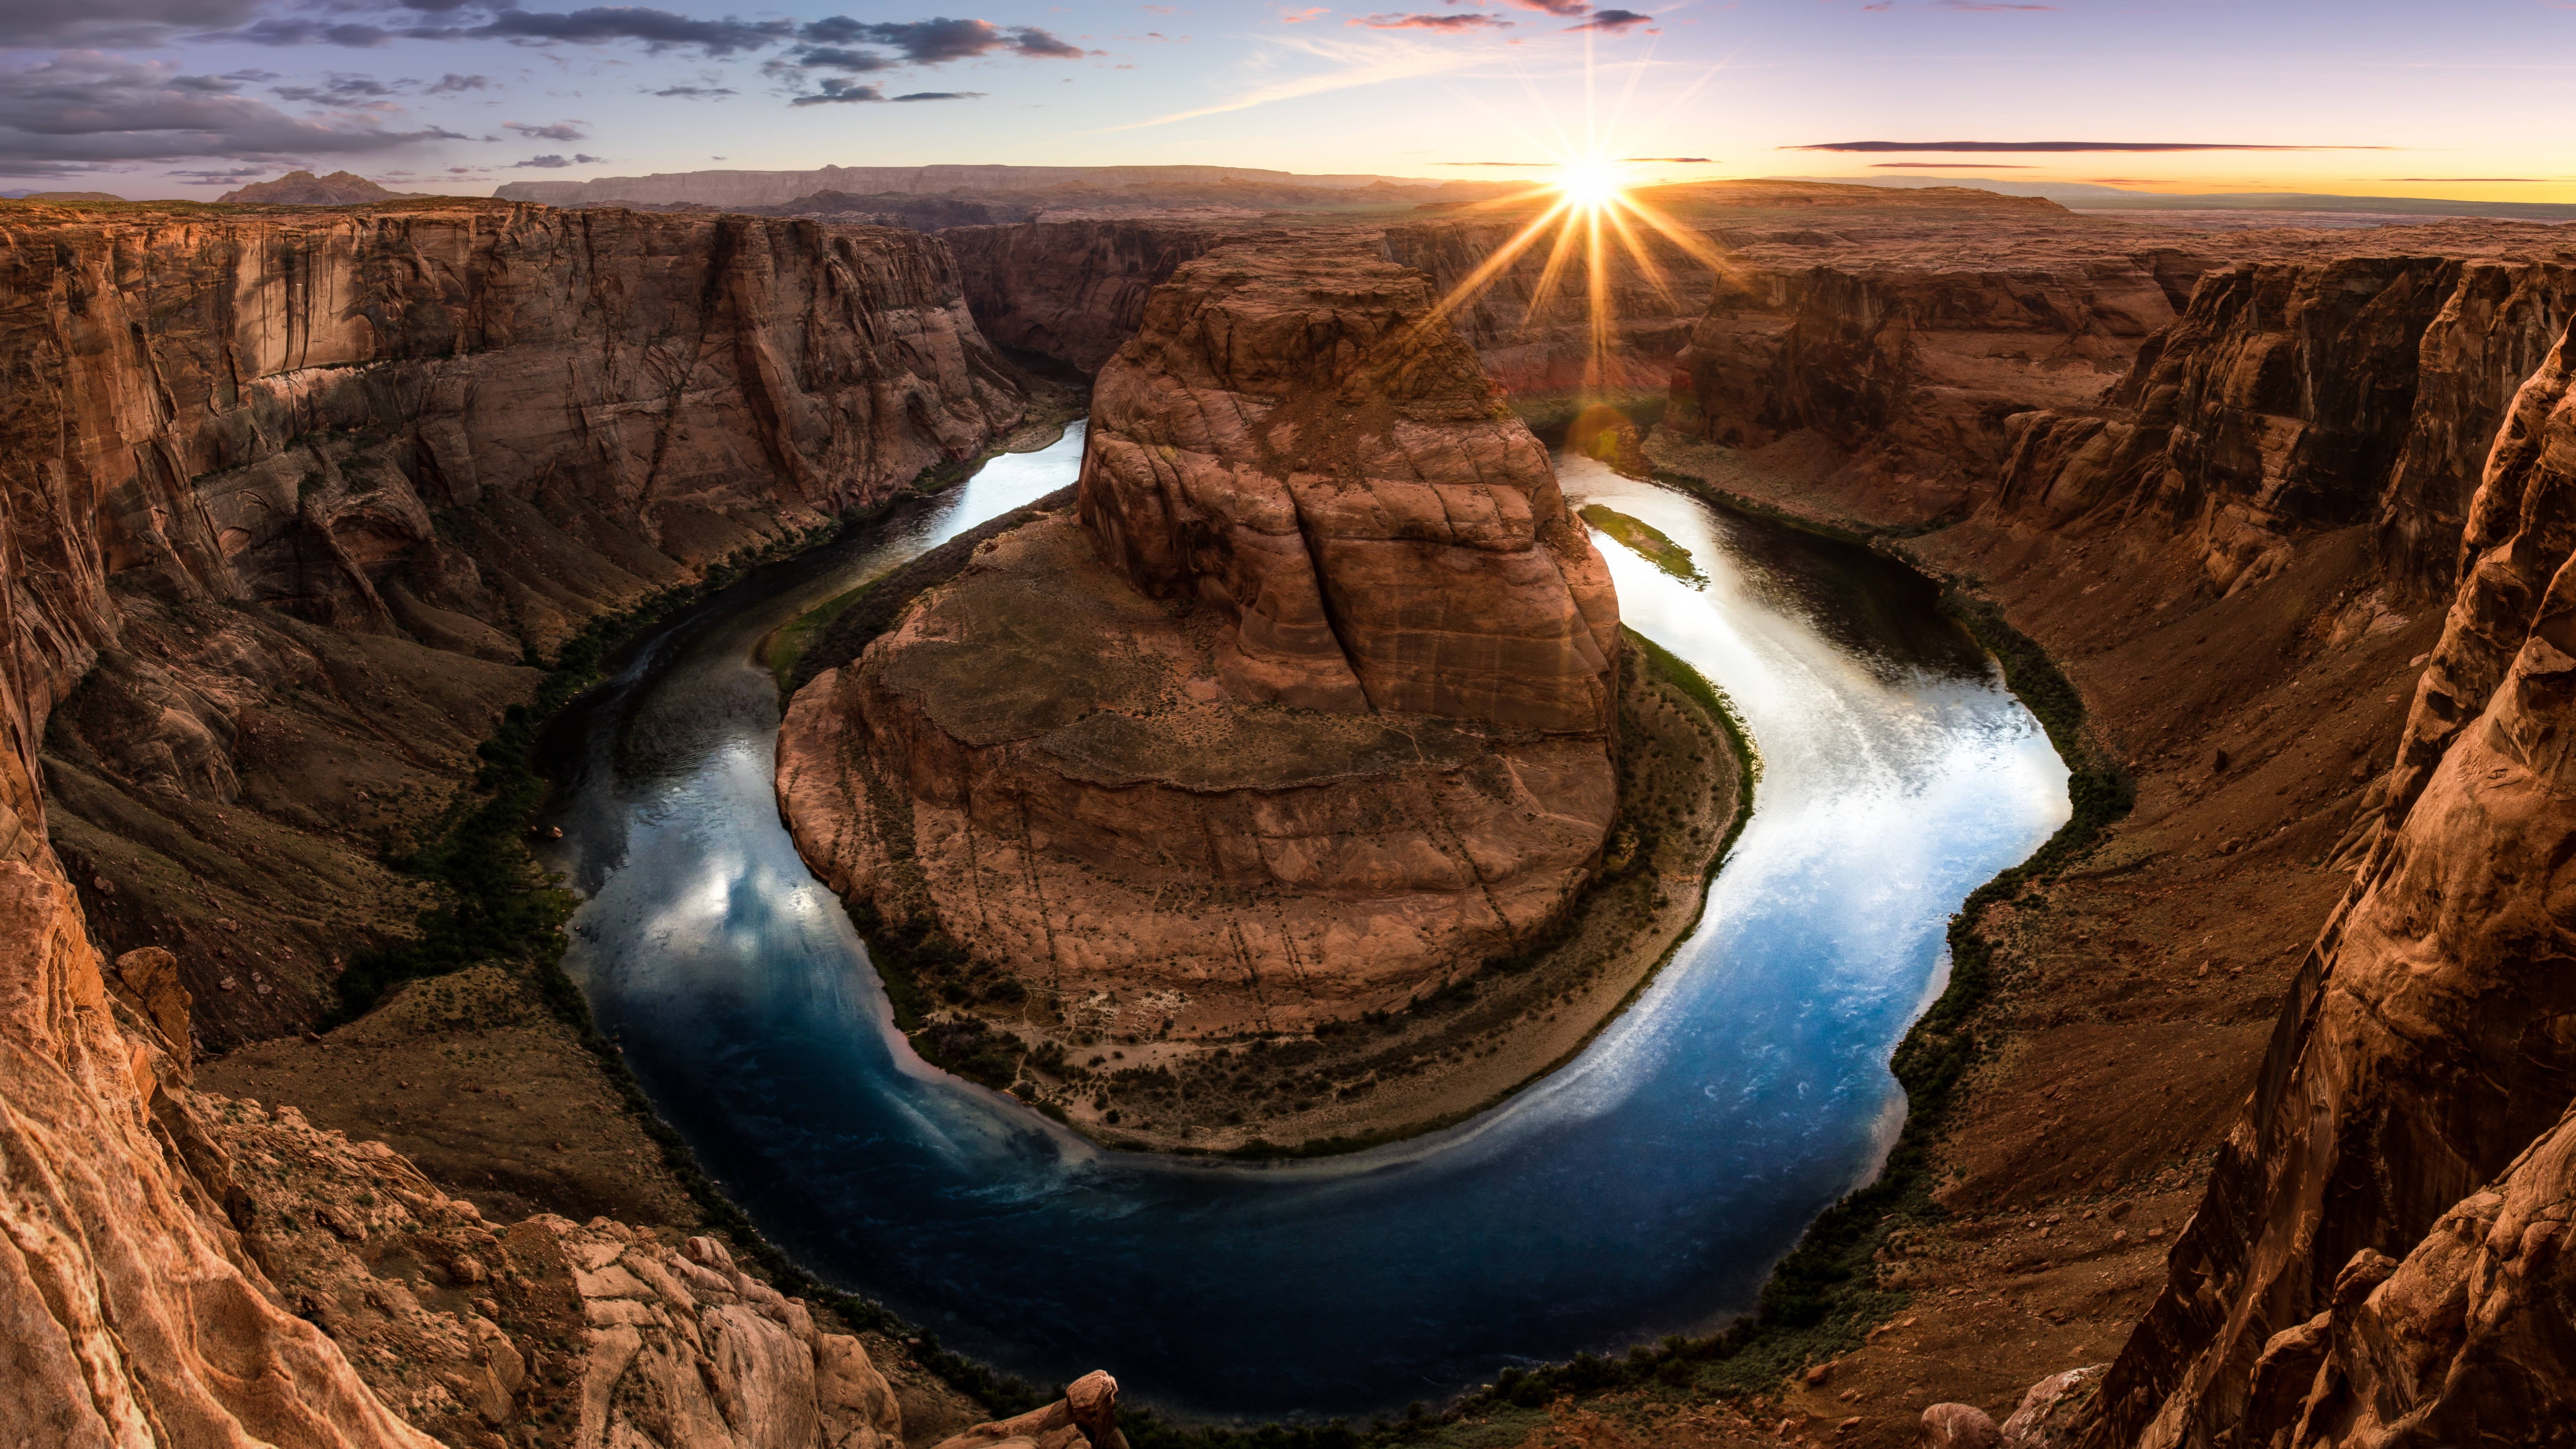 General 7680x4320 landscape tropical river water reflection nature Sun sunset glow clouds Horseshoe Bend